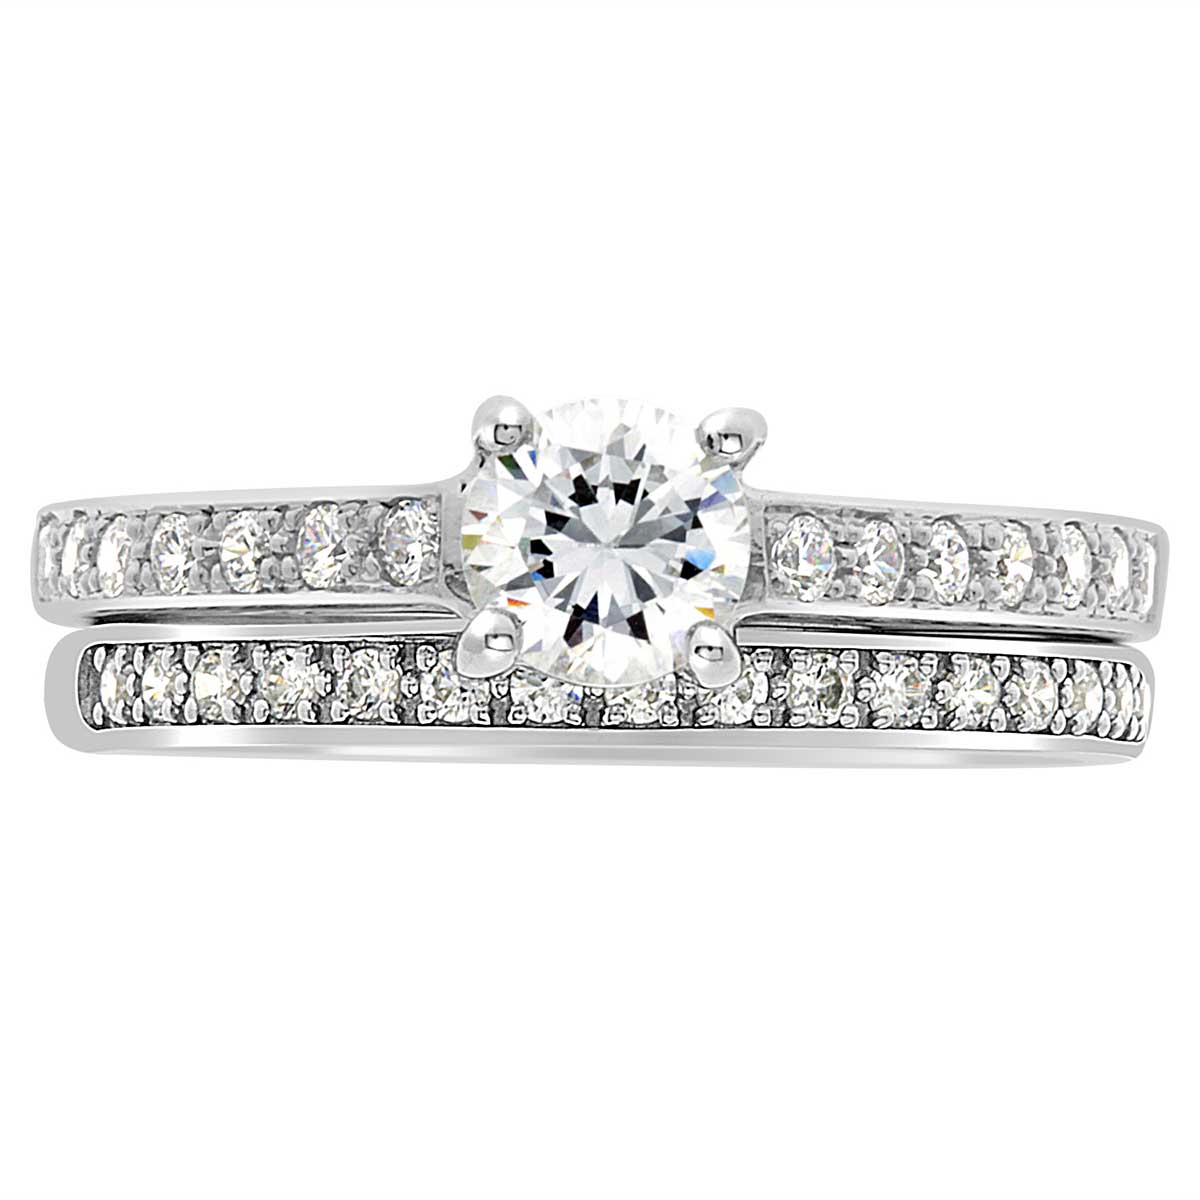 Pavé Diamond Ring manufactured in white gold pictured with a diamond set wedding ring